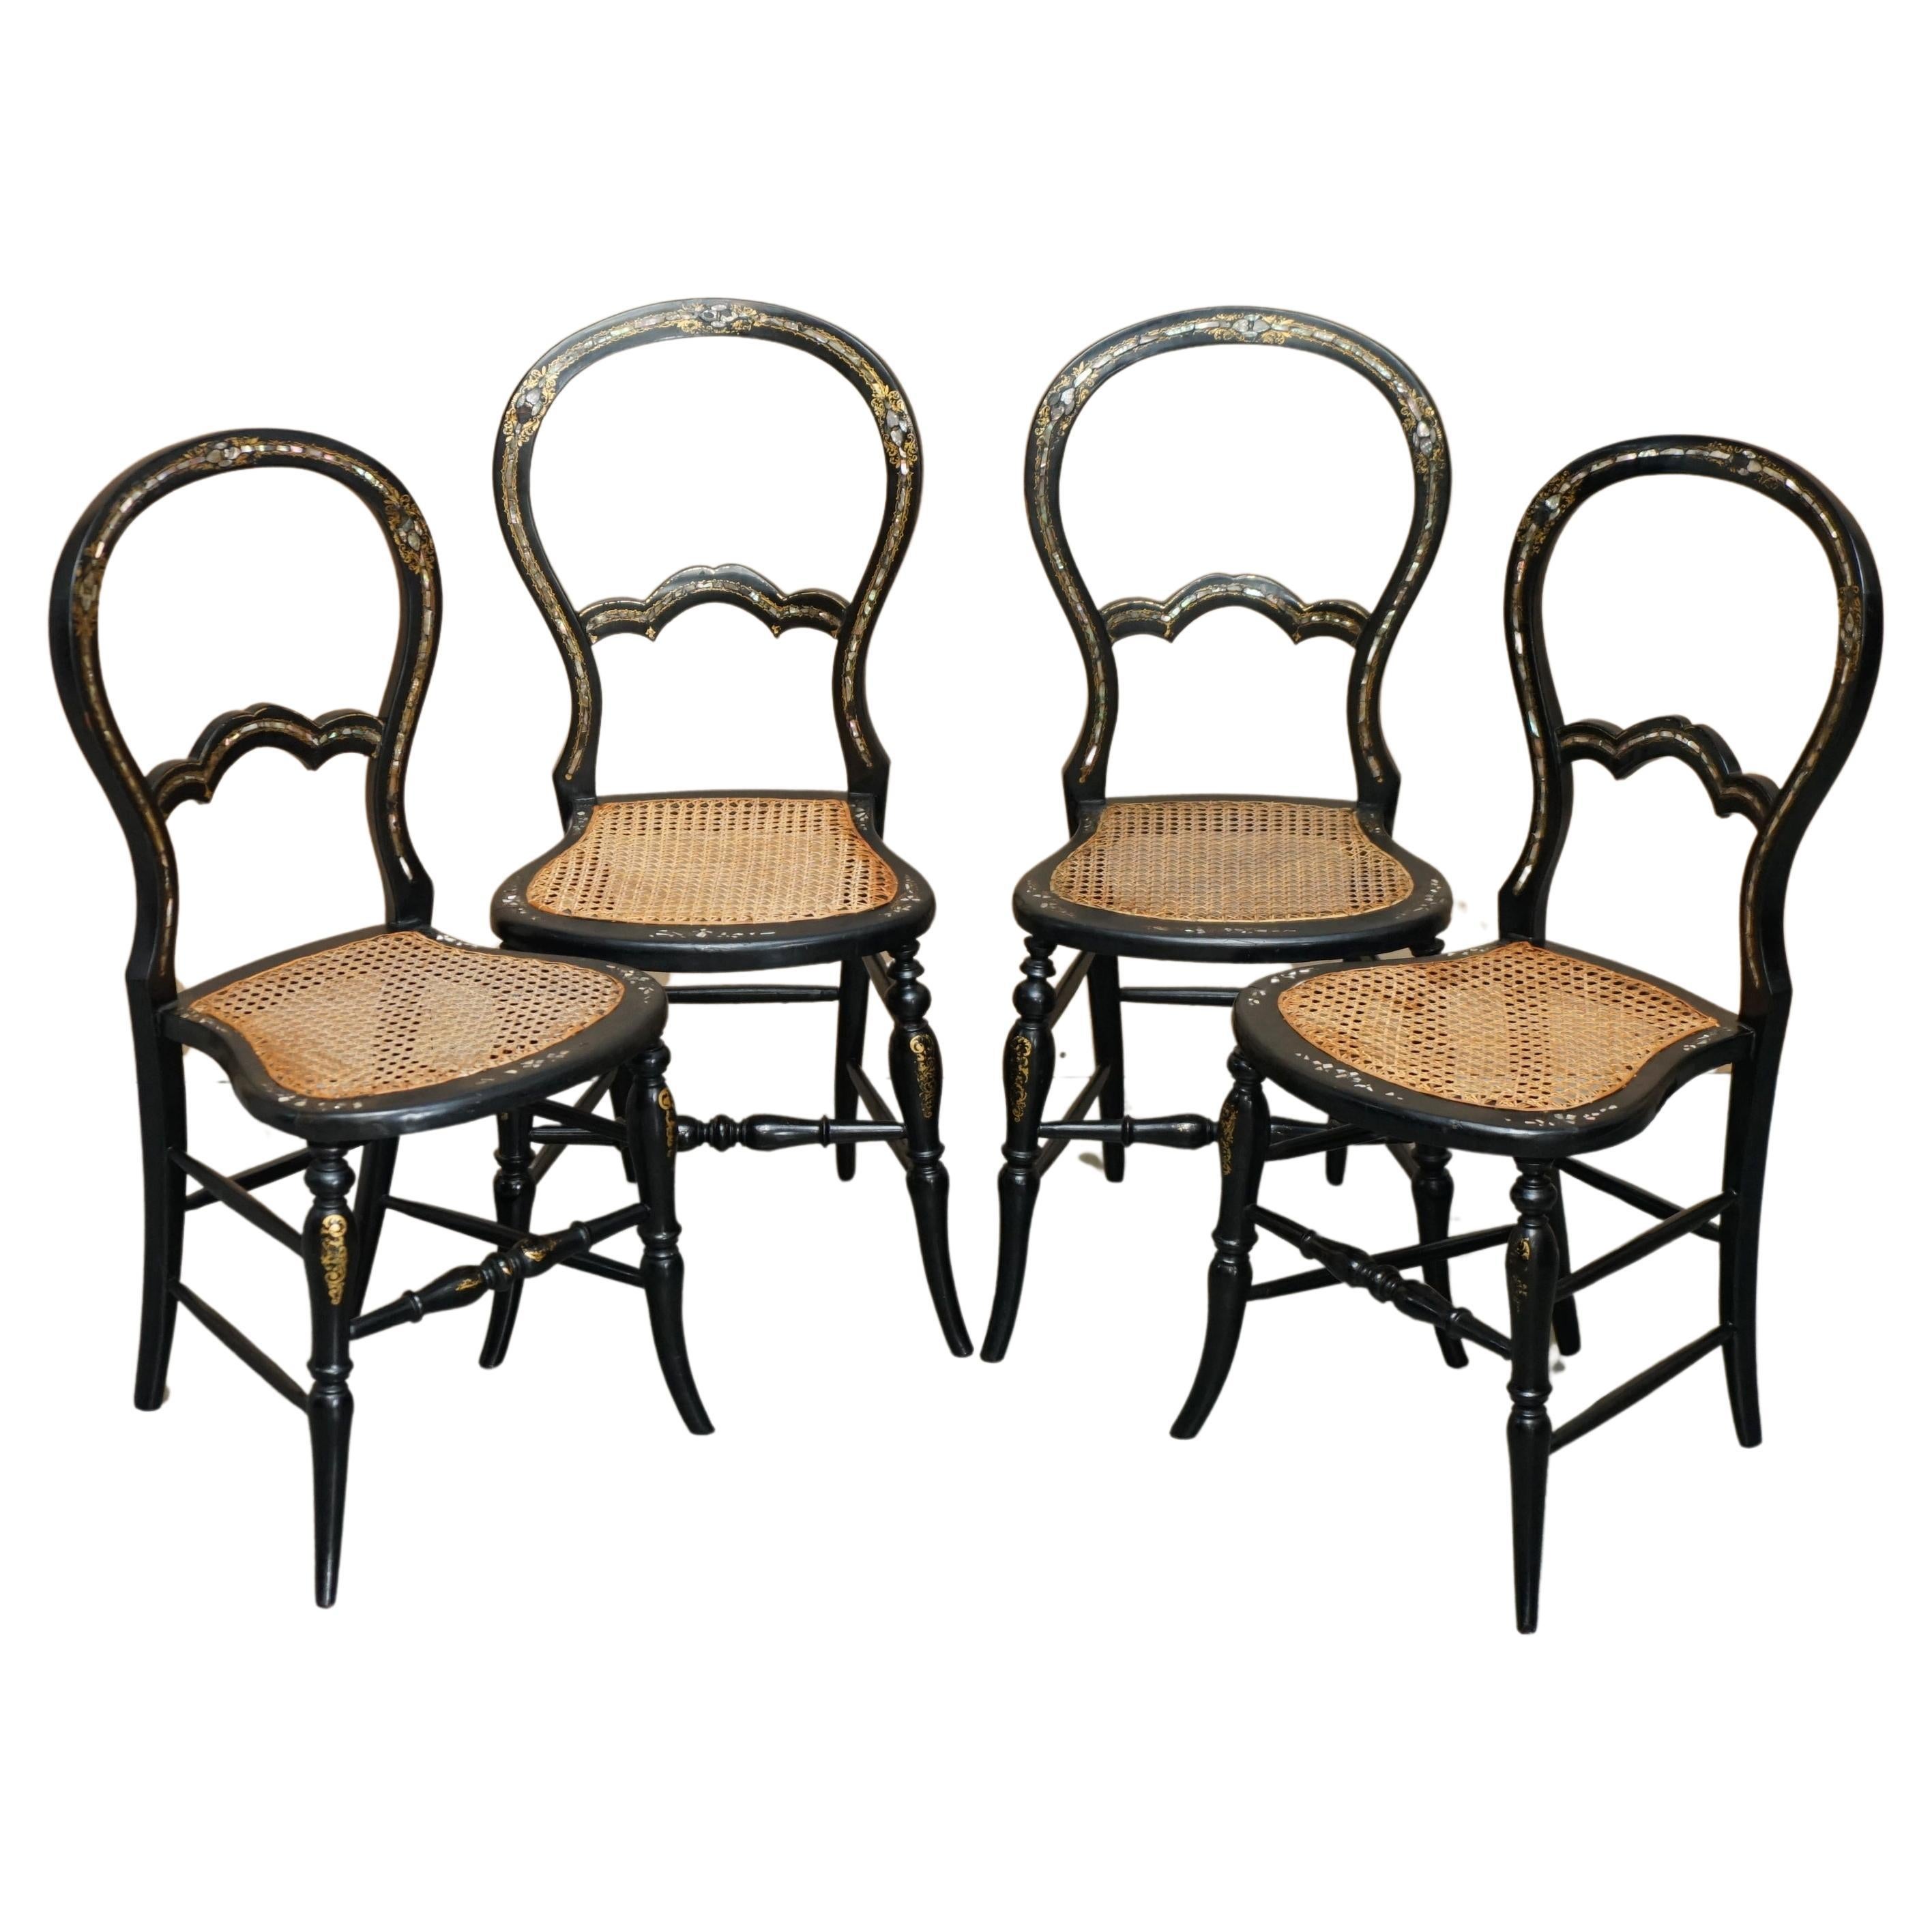 VIER FINE UND ANTIQUE REGENCY BERGERE MOTHER OF PEARL EBONISED SIDE CHAIRs im Angebot